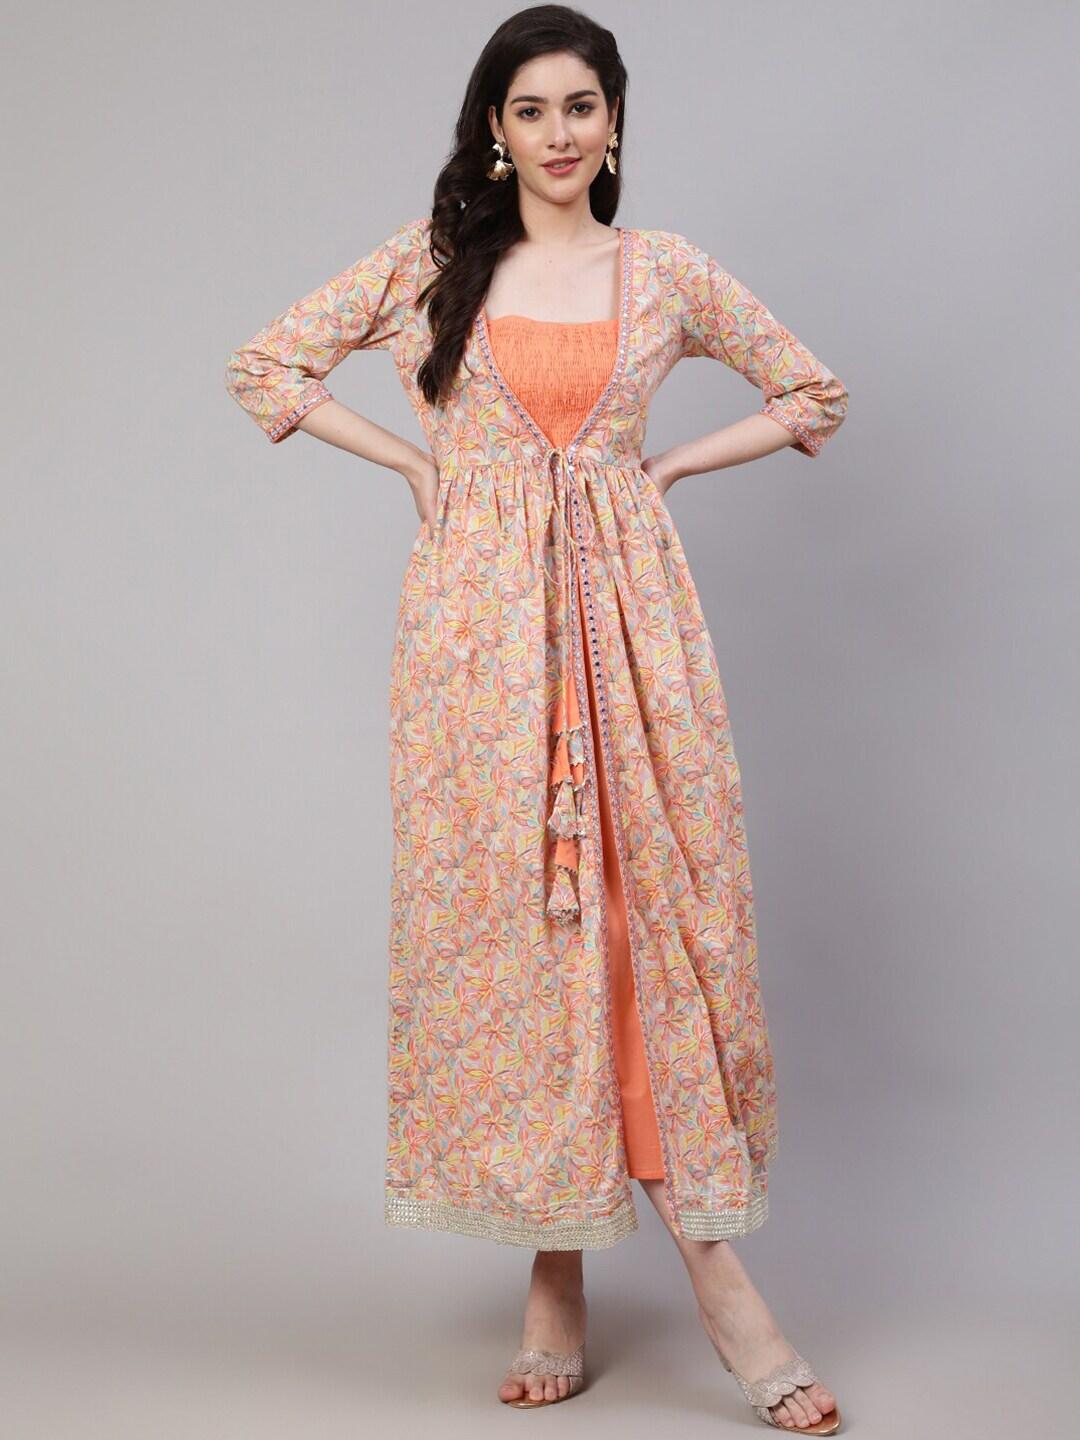 nayo floral printed smocked cotton maxi dress with jacket